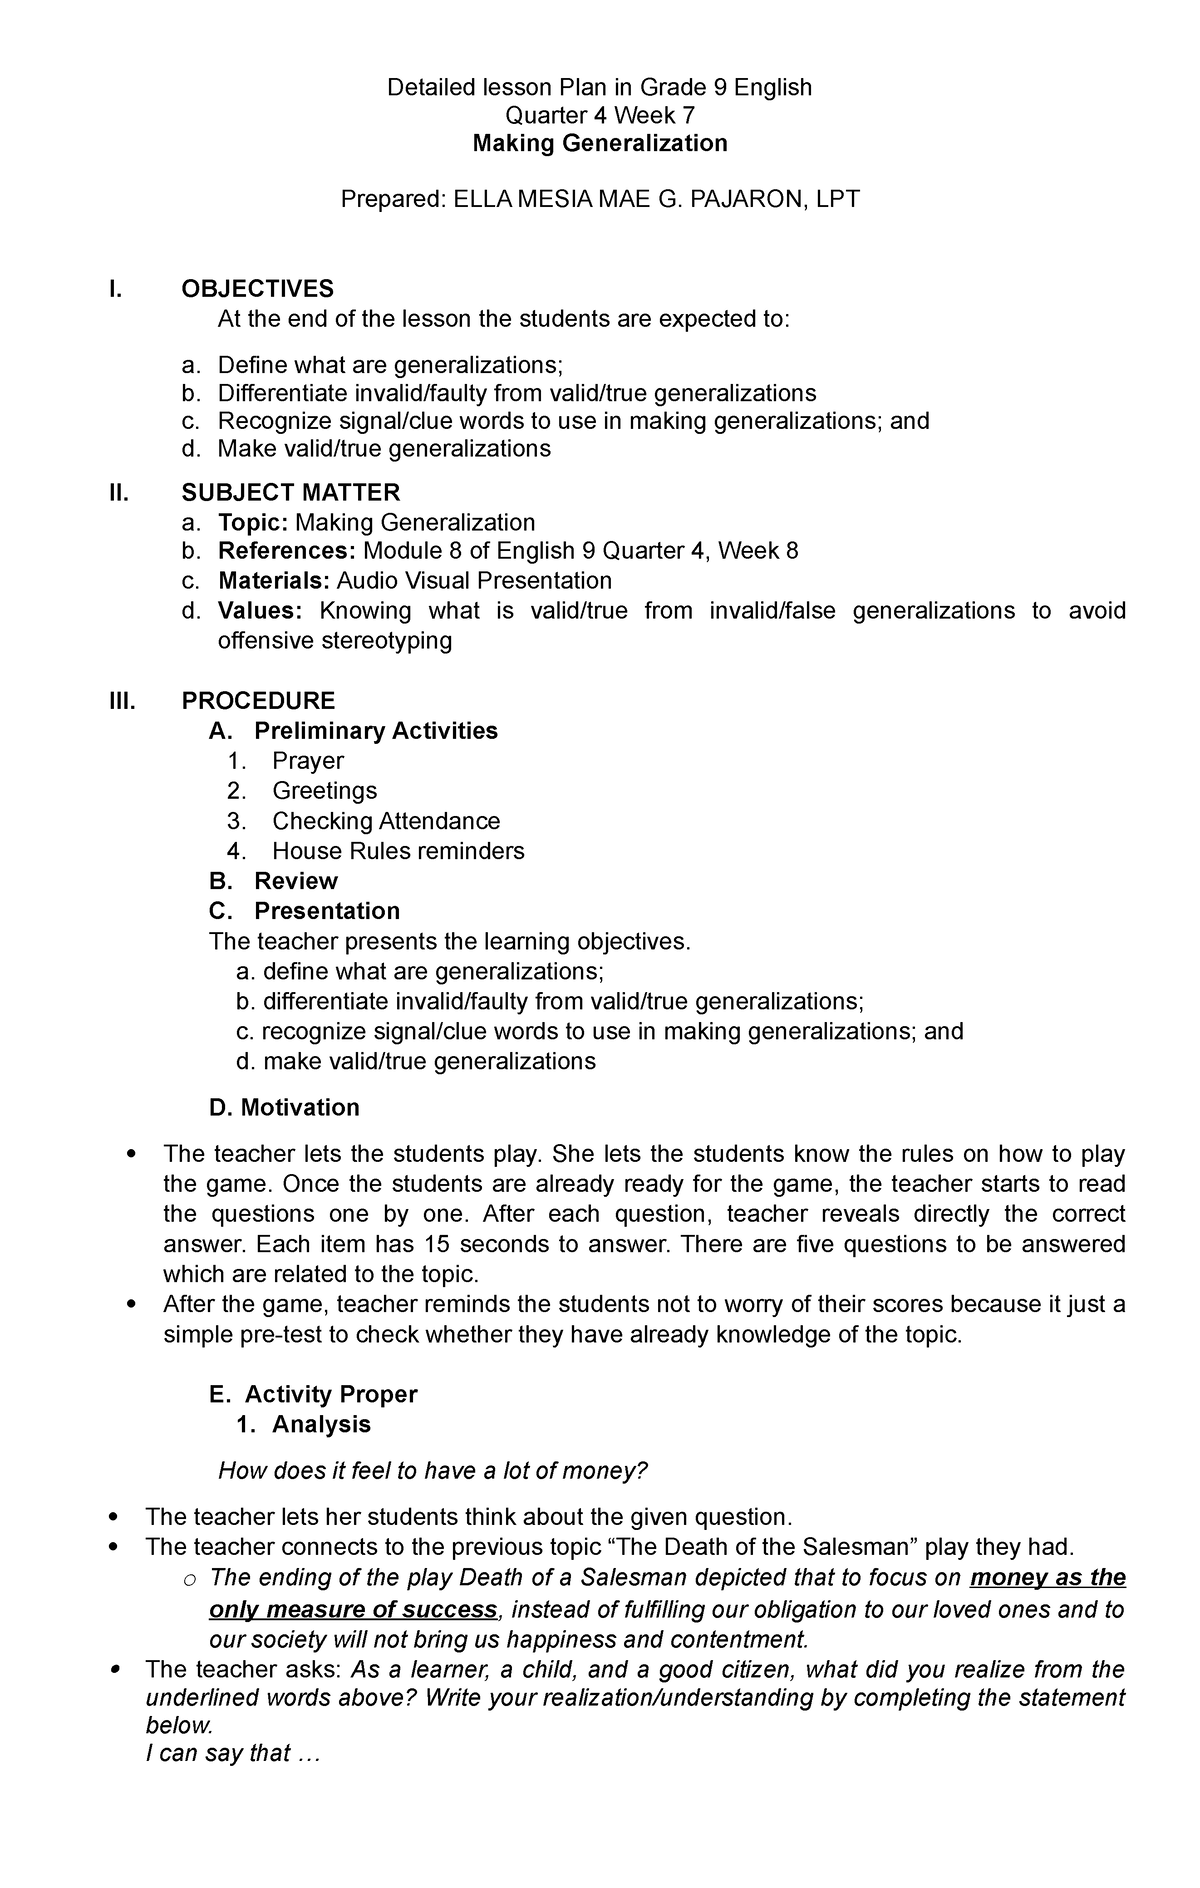 Semi Detailed Lesson Plan In Grade 10 English 9 Detailed Lesson Plan 